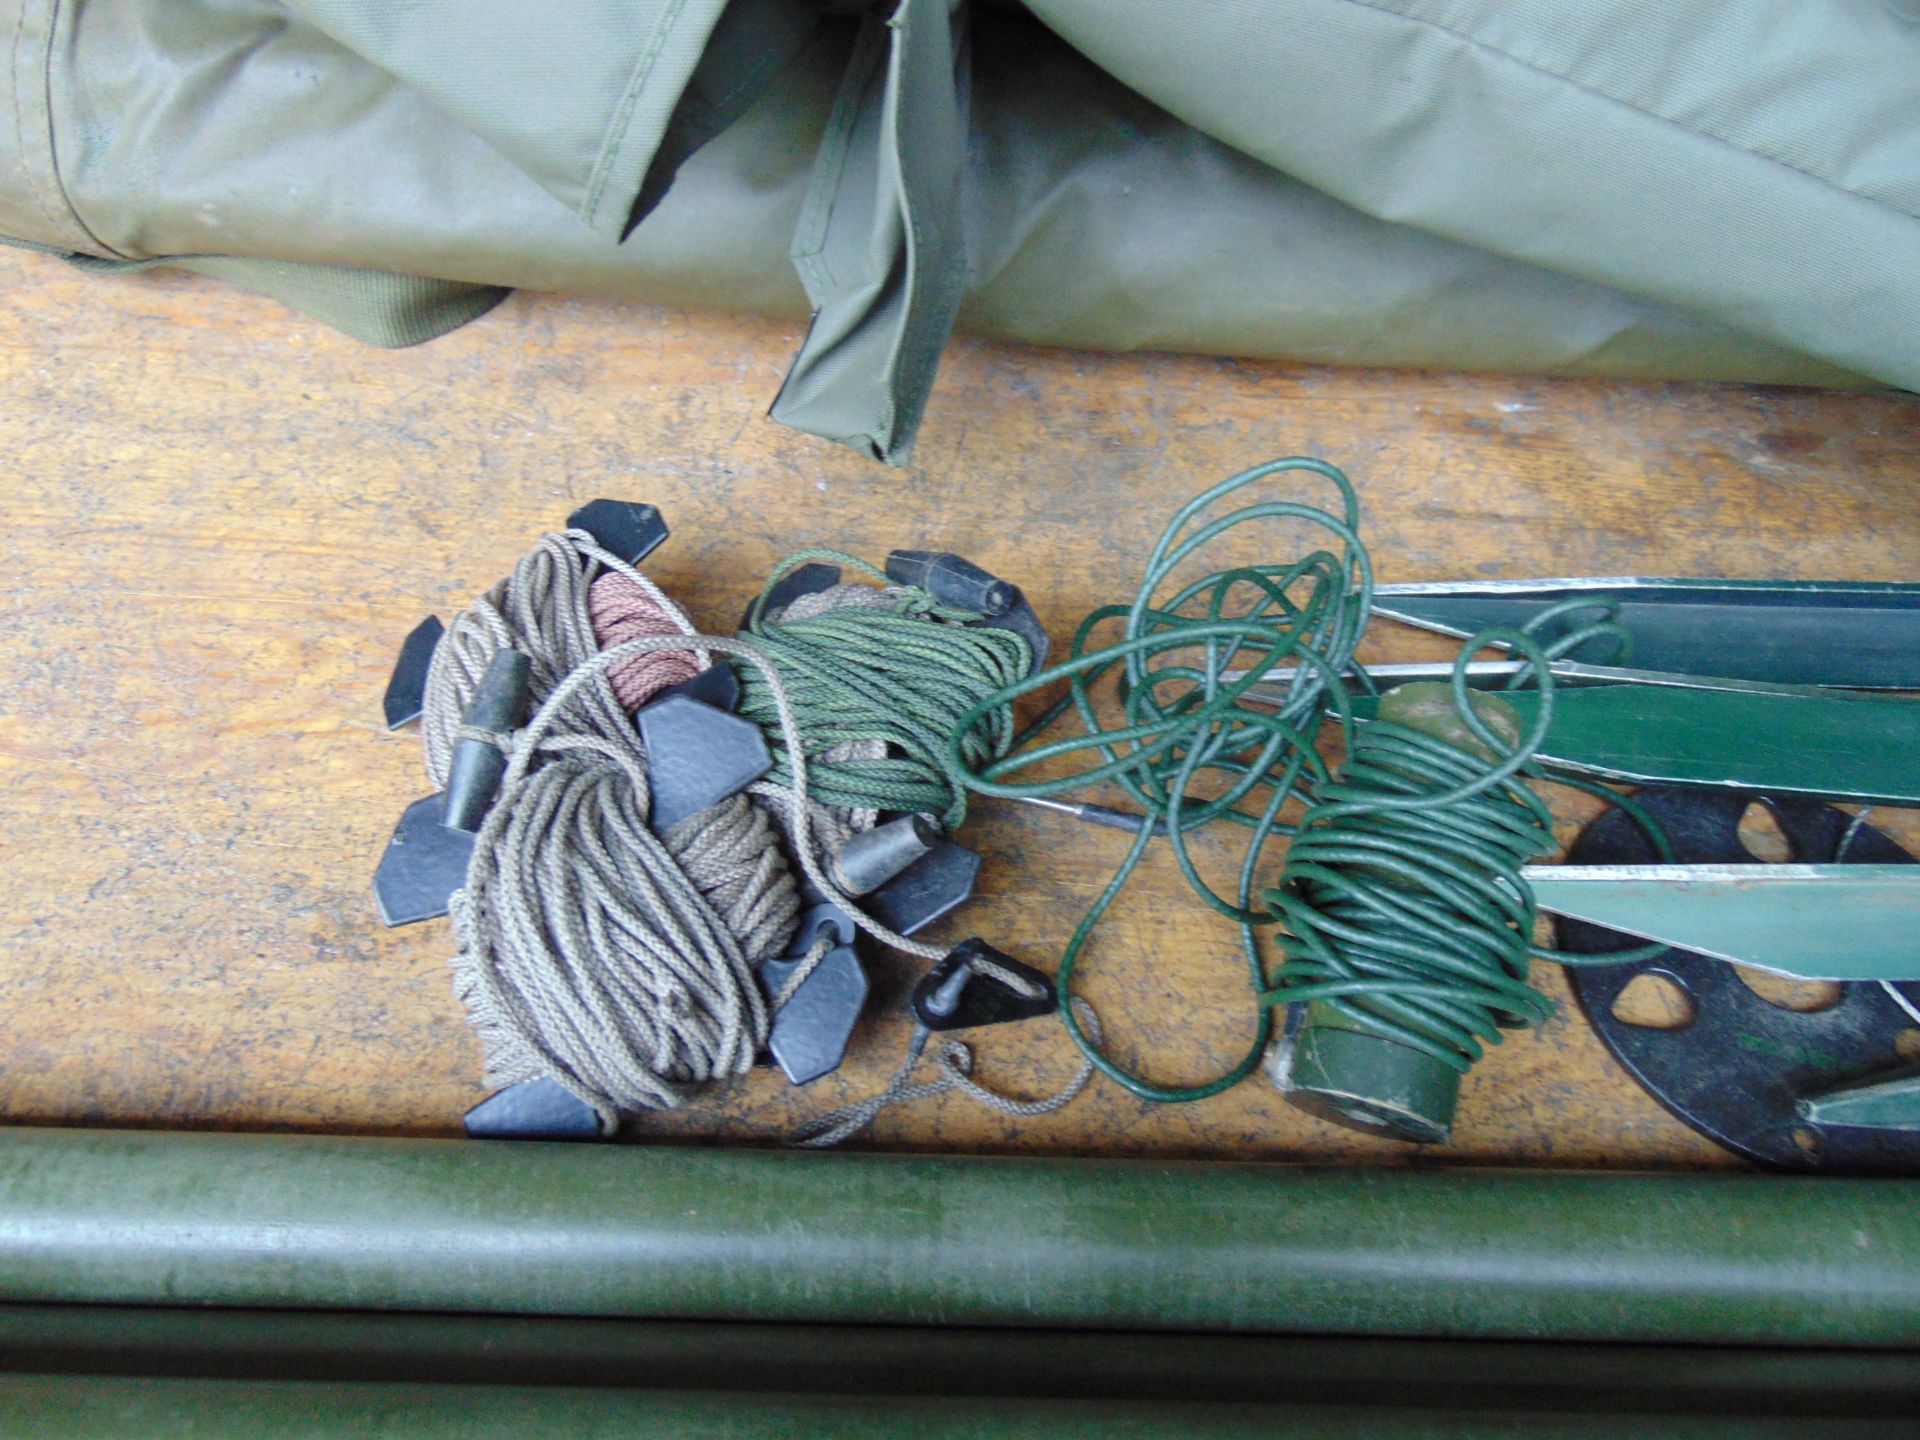 2 x Clansman 6 Section Field Antennas c/w Accessories and Bag - Image 5 of 7